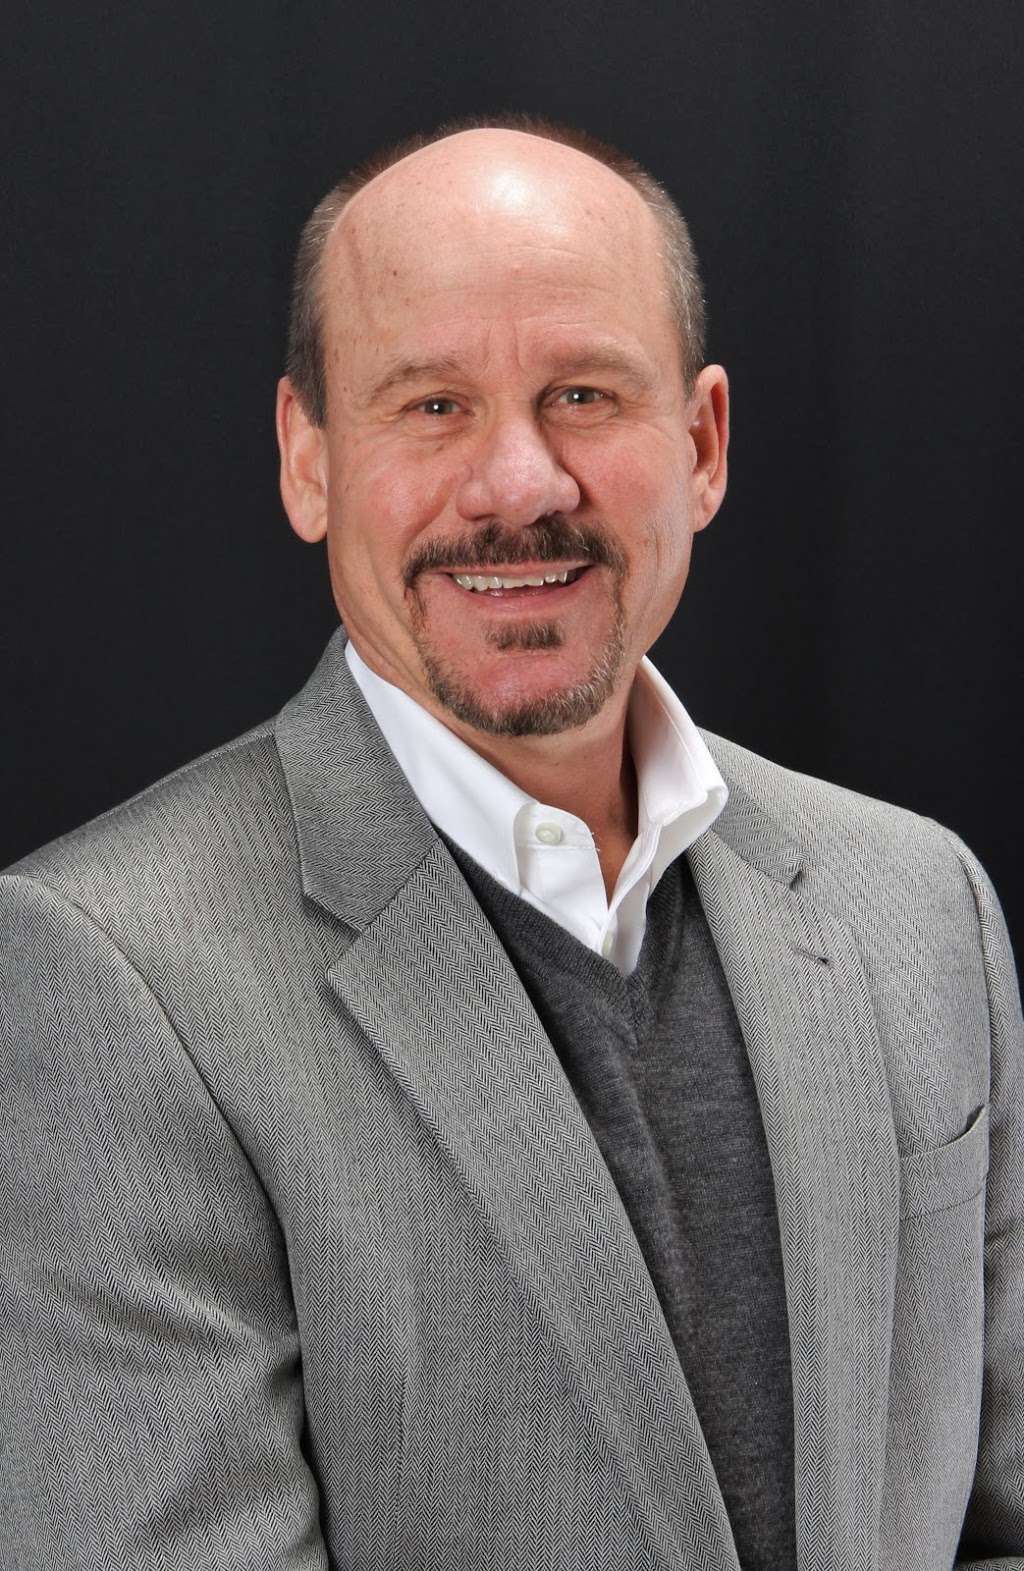 Agent Mike Dybas RE/MAX Unlimited Northwest Bartlett | 1013 W Stearns Rd, Bartlett, IL 60103 | Phone: (847) 334-6400